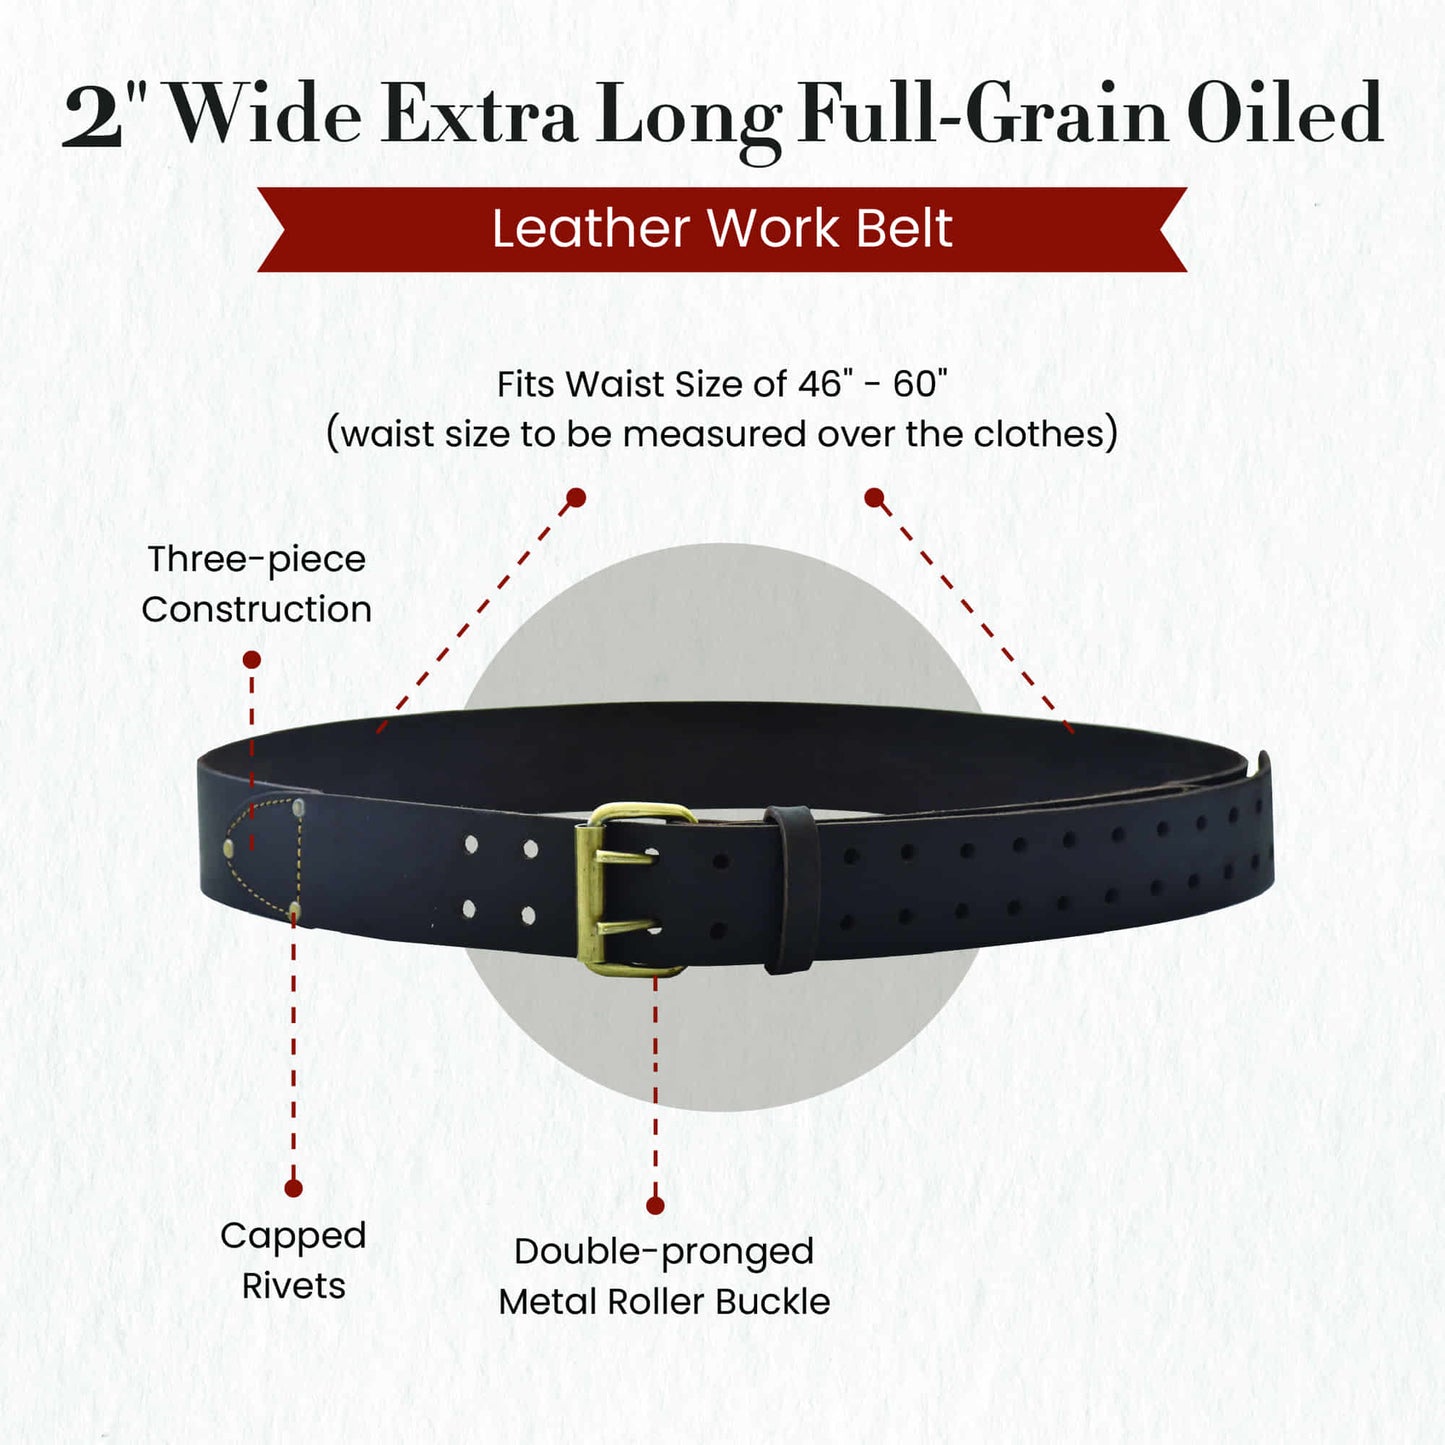 Style n Craft 74053 - 2 Inch Wide Work Belt - Extra Long for waist size 46"- 60" - in Heavy Top Grain Oiled Leather with Double Prong Metal Roller Buckle - Front View Showing Details